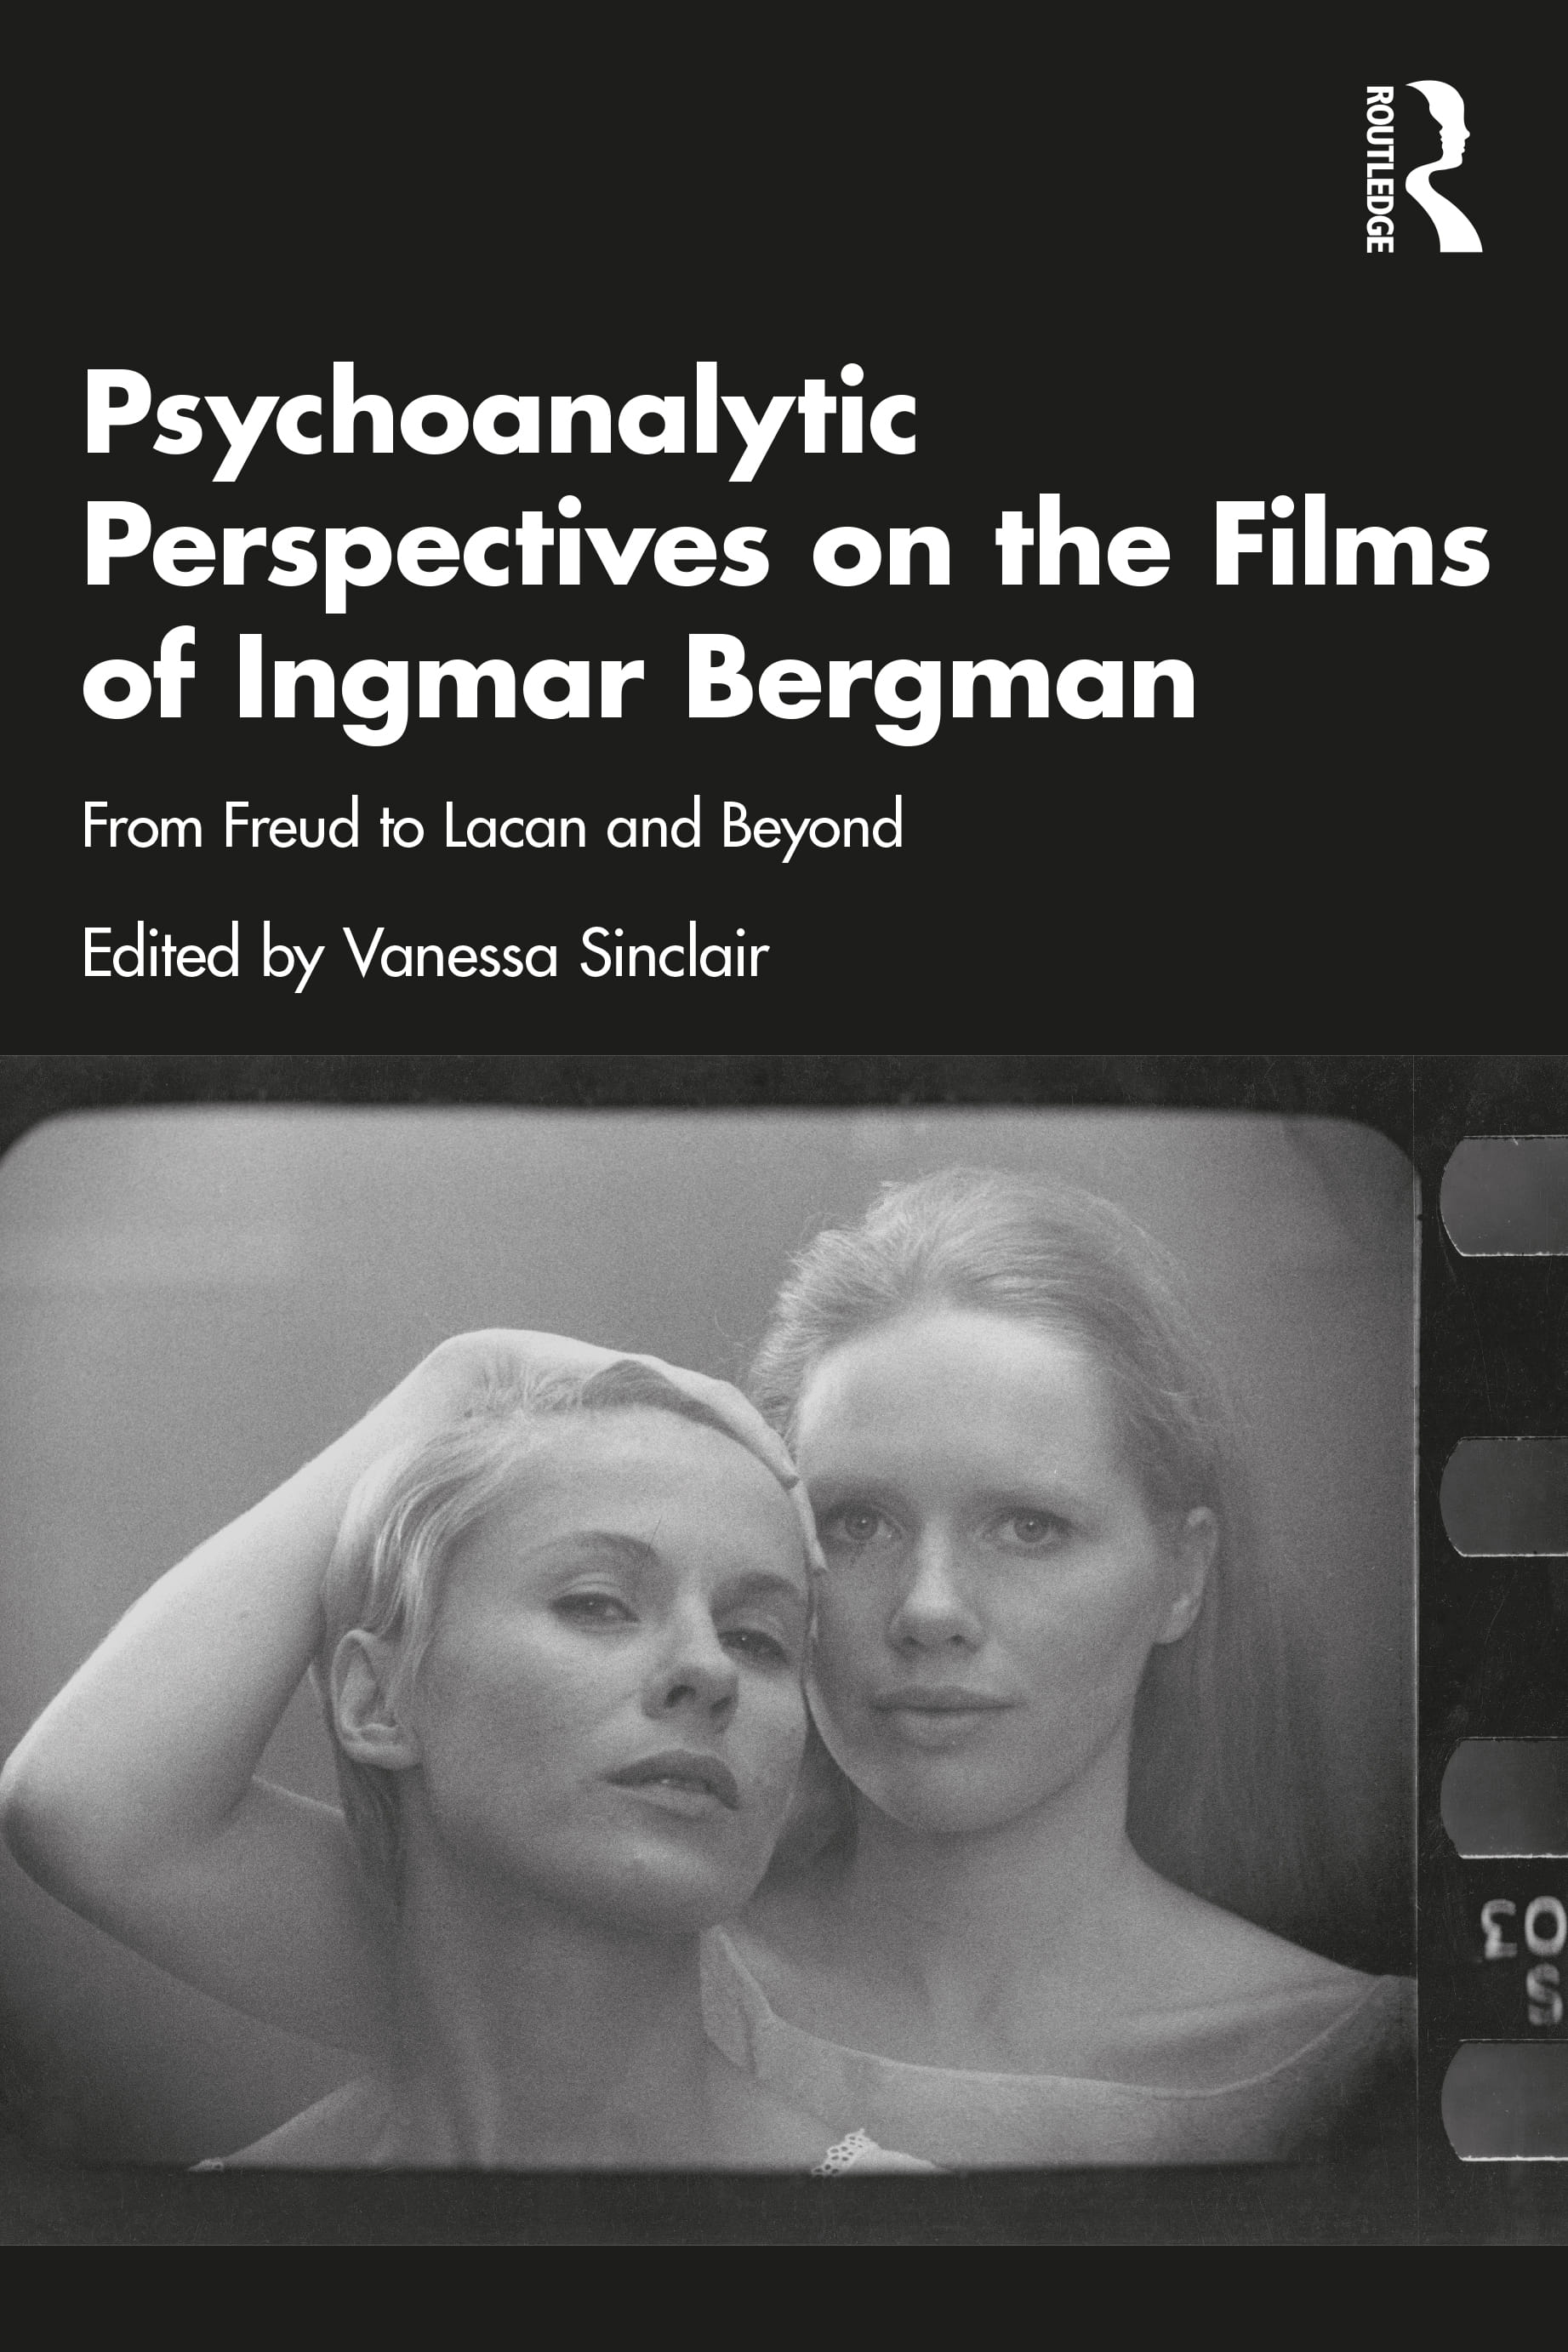 Psychoanalytic Perspectives on the Films of Ingmar Bergman: A Freudian-Lacanian Lens